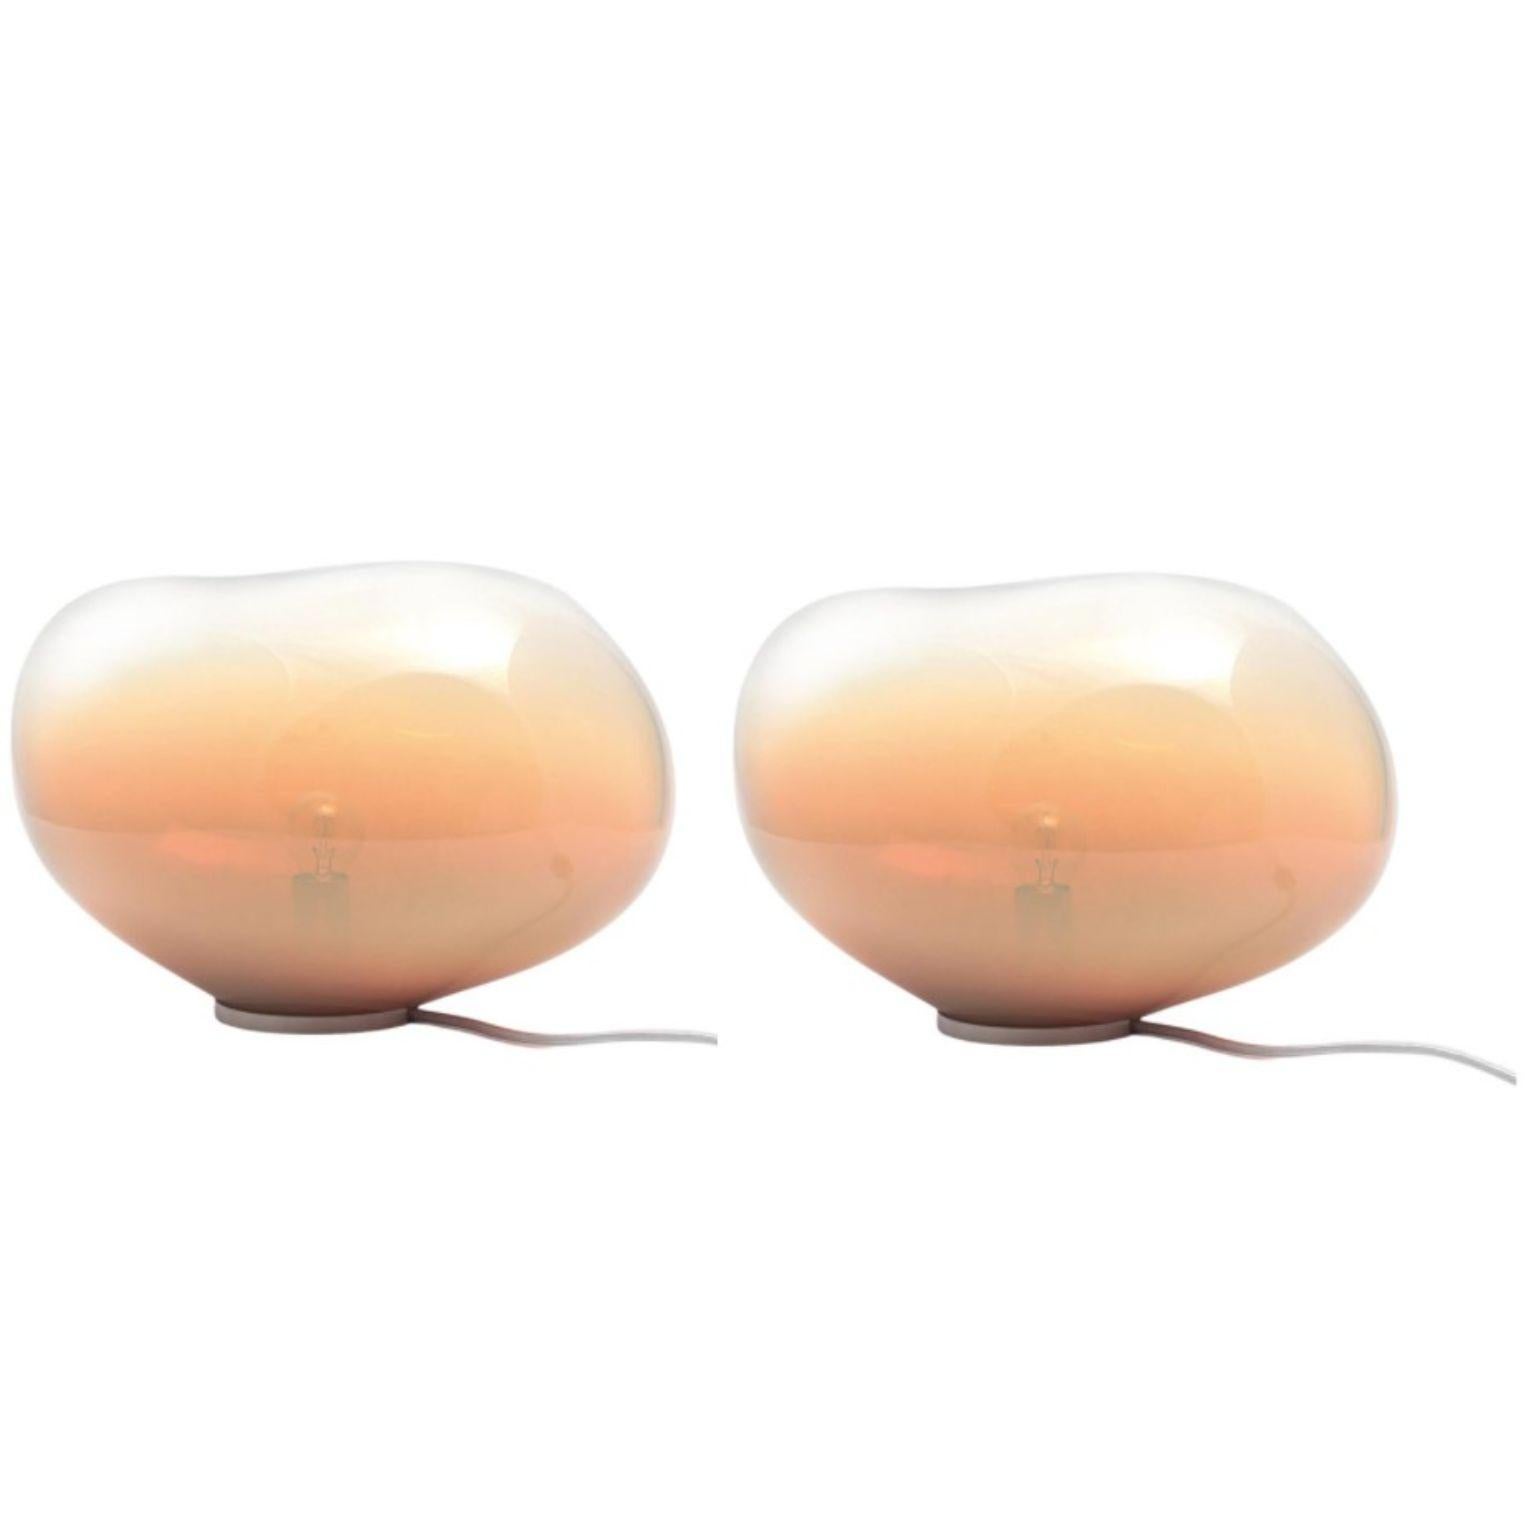 Set of 2 Sedna Amber Iridescent M Table Lamps by Eloa
No UL listed 
Material: Glass, Steel, Silver, LED Bulb
Dimensions: D25 x W38 x H28 cm
Also Available in different colours and dimensions.

All our lamps can be wired according to each country. If